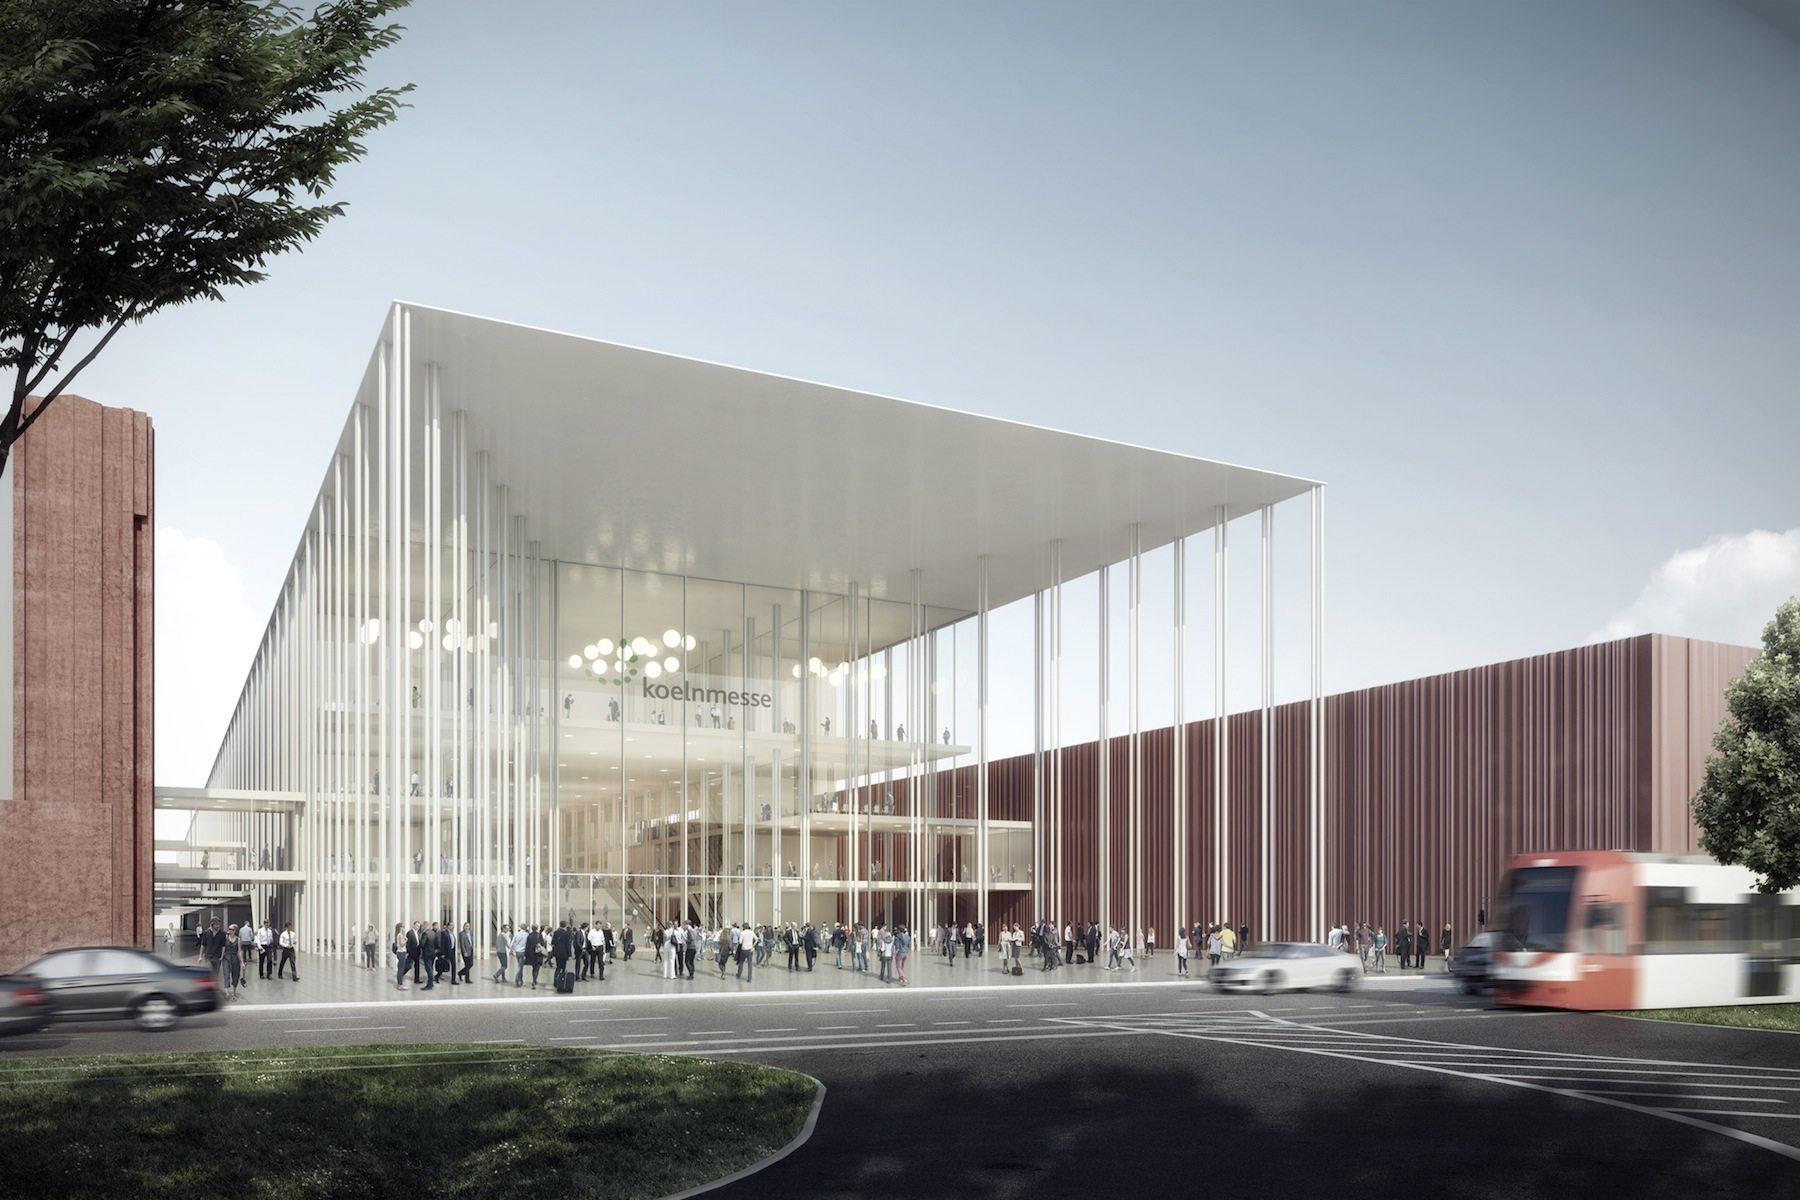 Architects' competition for Koelnmesse 3.0, draft Entrance East